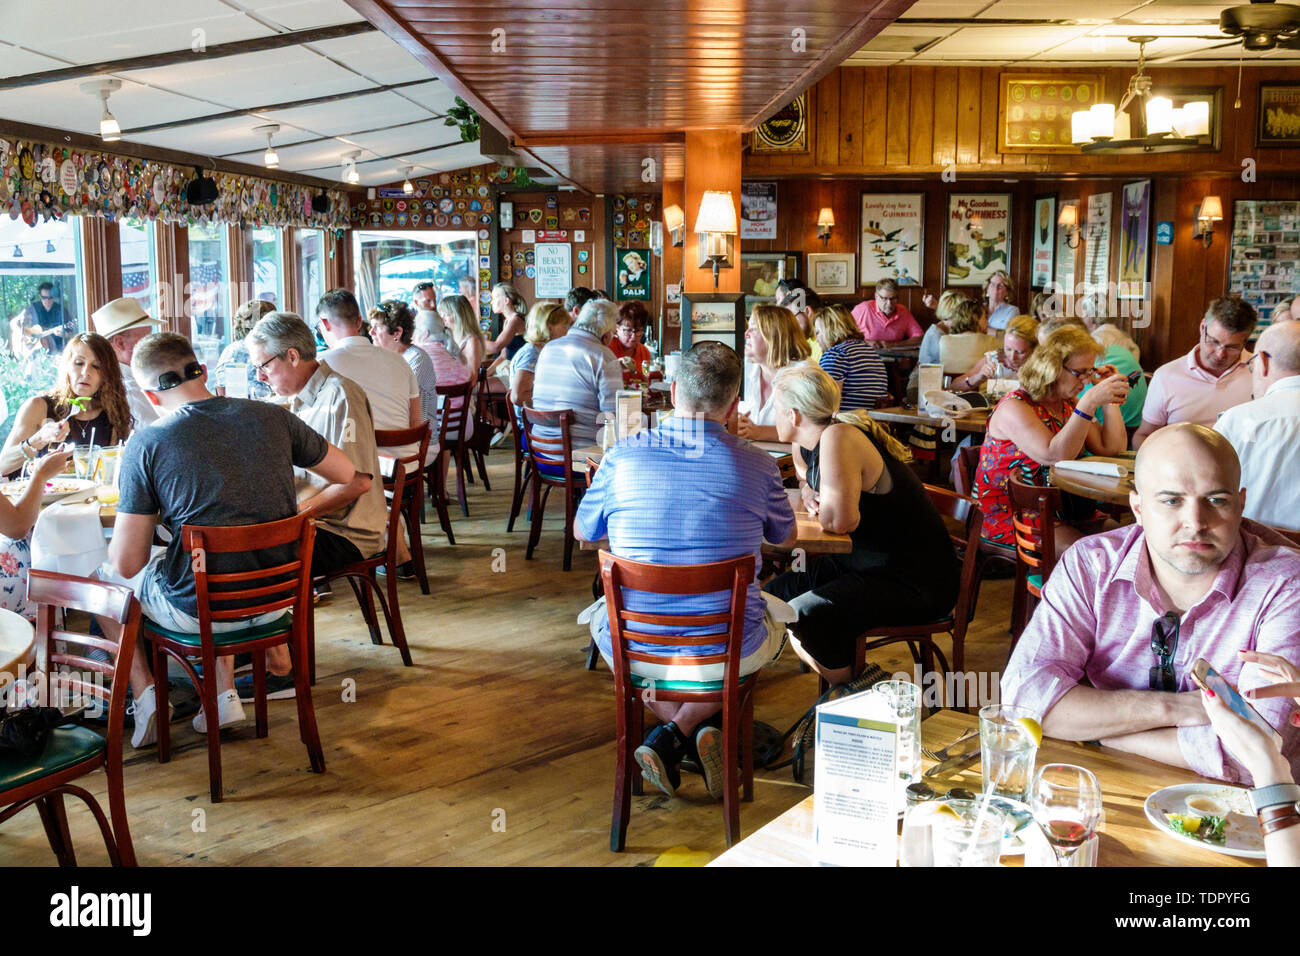 Florida Captiva Island The Mucky Duck restaurant,inside interior tables crowded busy dining diners, Stock Photo